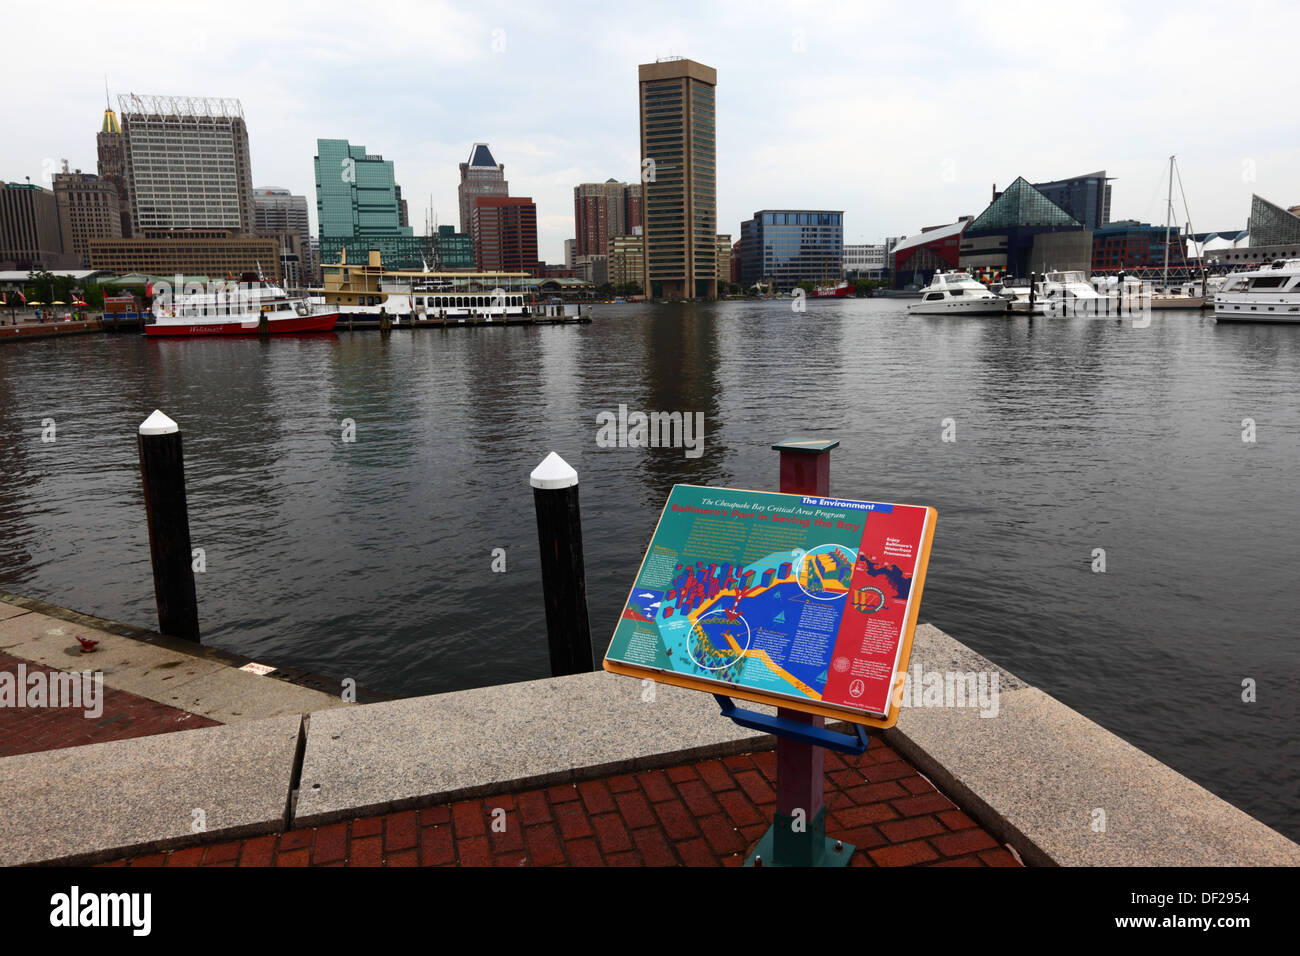 Sign describing the Chesapeake Bay Critical Area Program to clean up the Bay, Inner Harbor, Baltimore, Maryland, USA Stock Photo